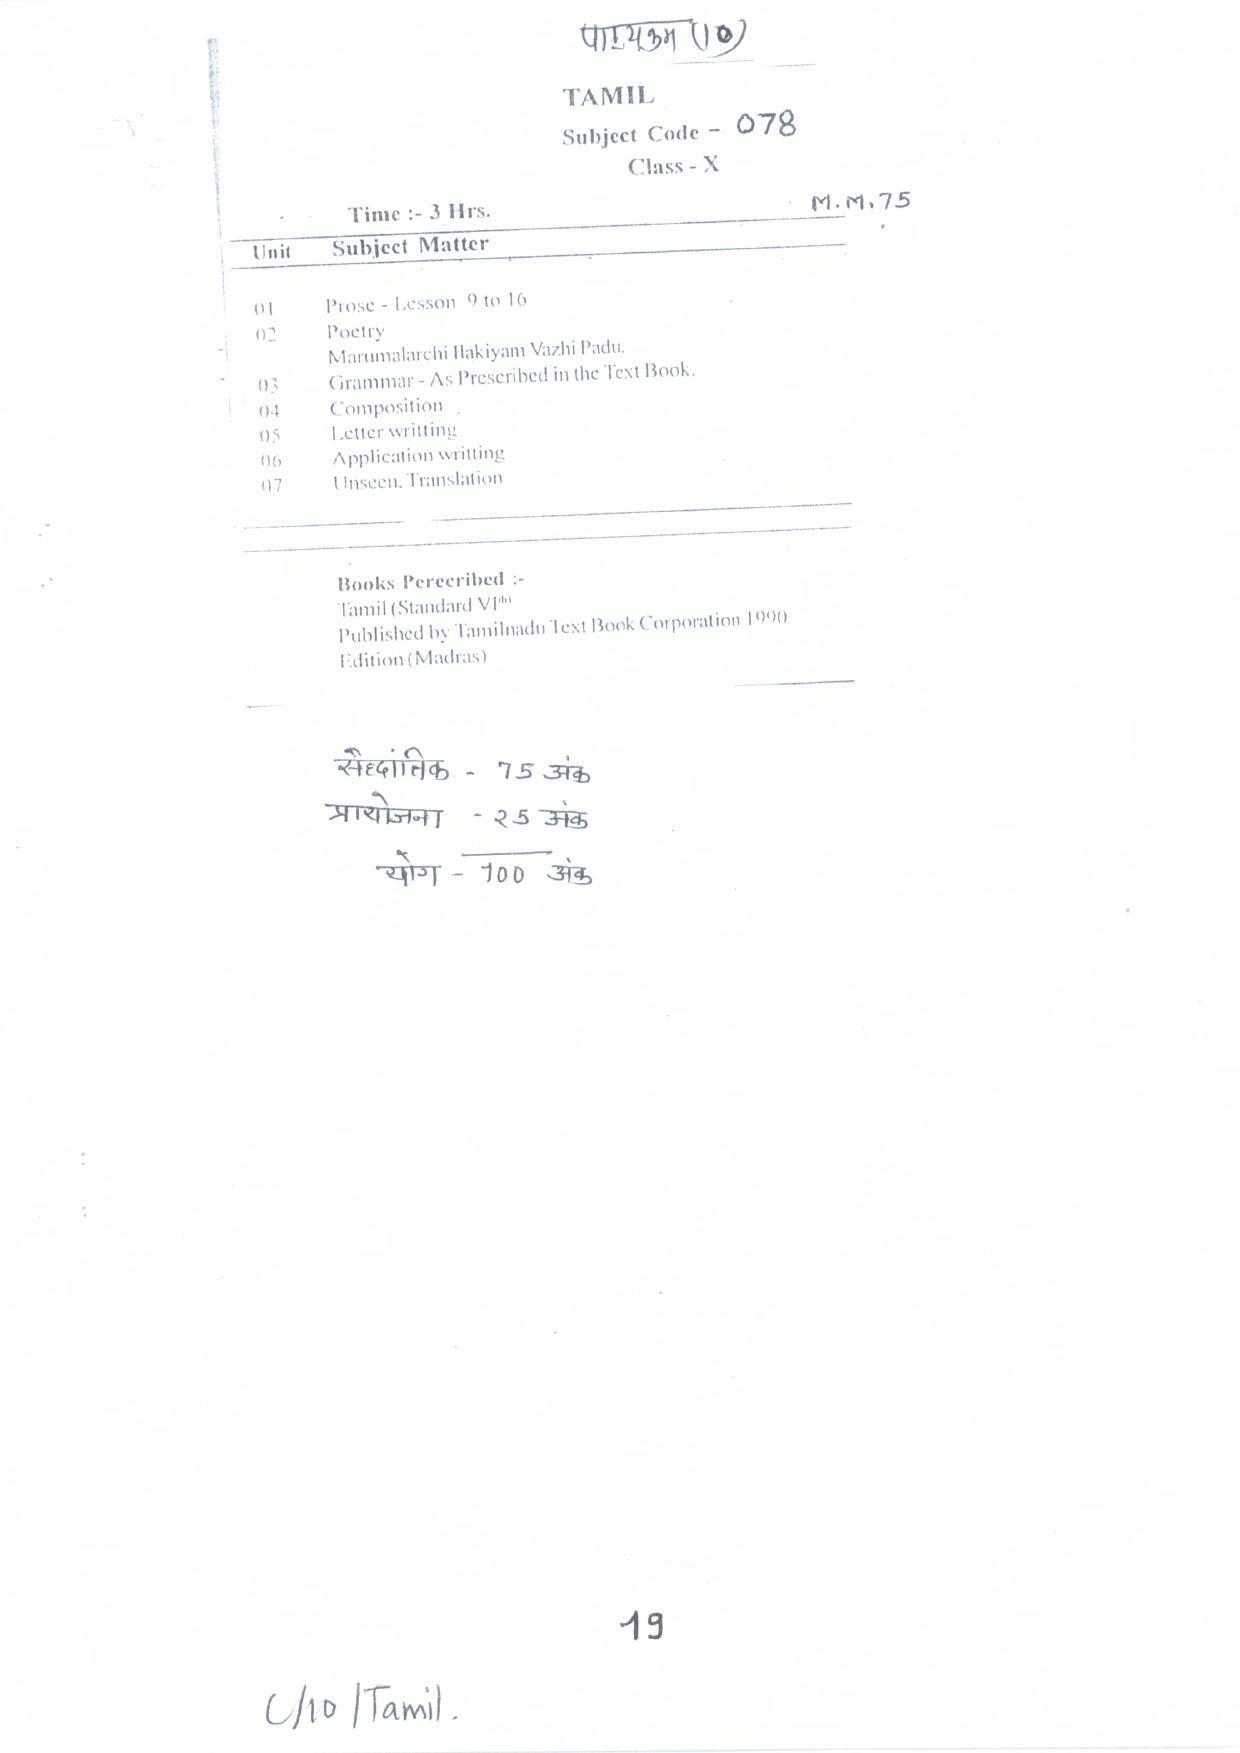 CGBSE Class 10th Syllabus 2021-2022 - Tamil - Page 1